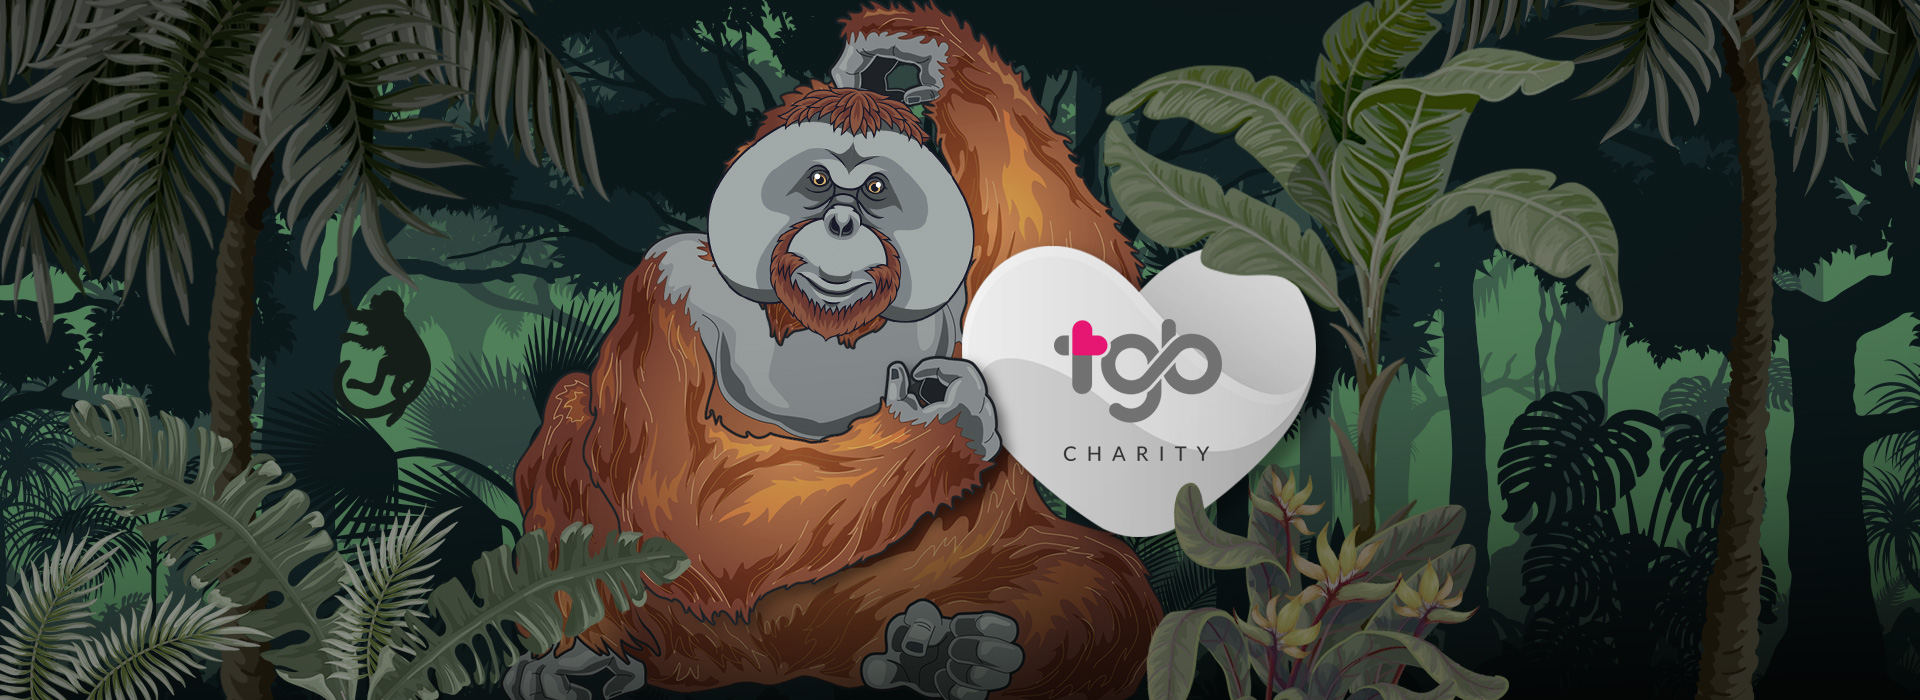 Celebrating World Rainforest Day with the Gardener of the Forest - TGB Charity